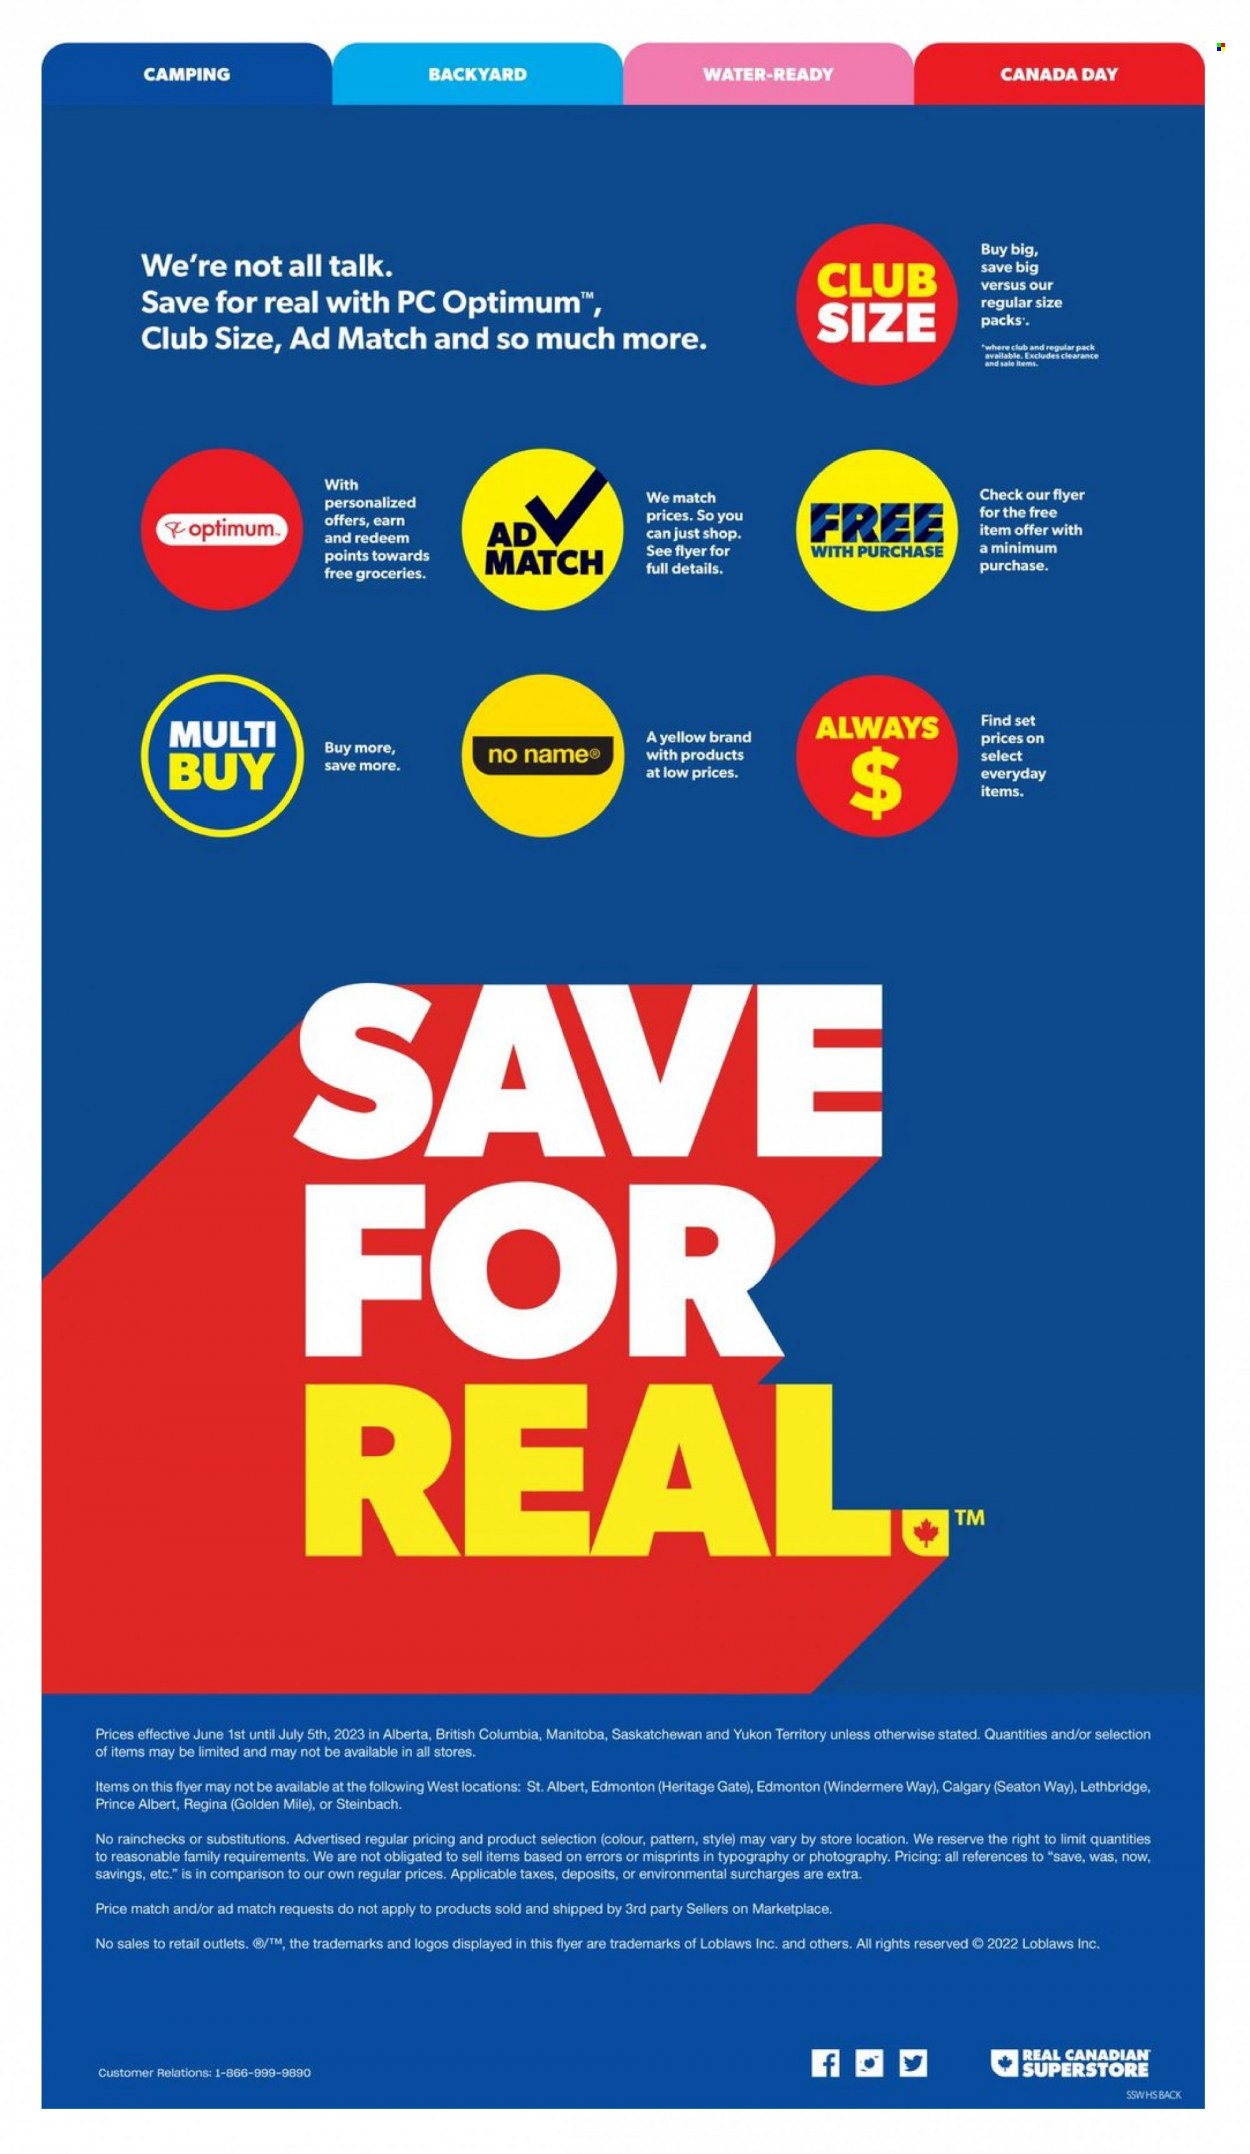 Real Canadian Superstore flyer  - June 01, 2023 - July 05, 2023.